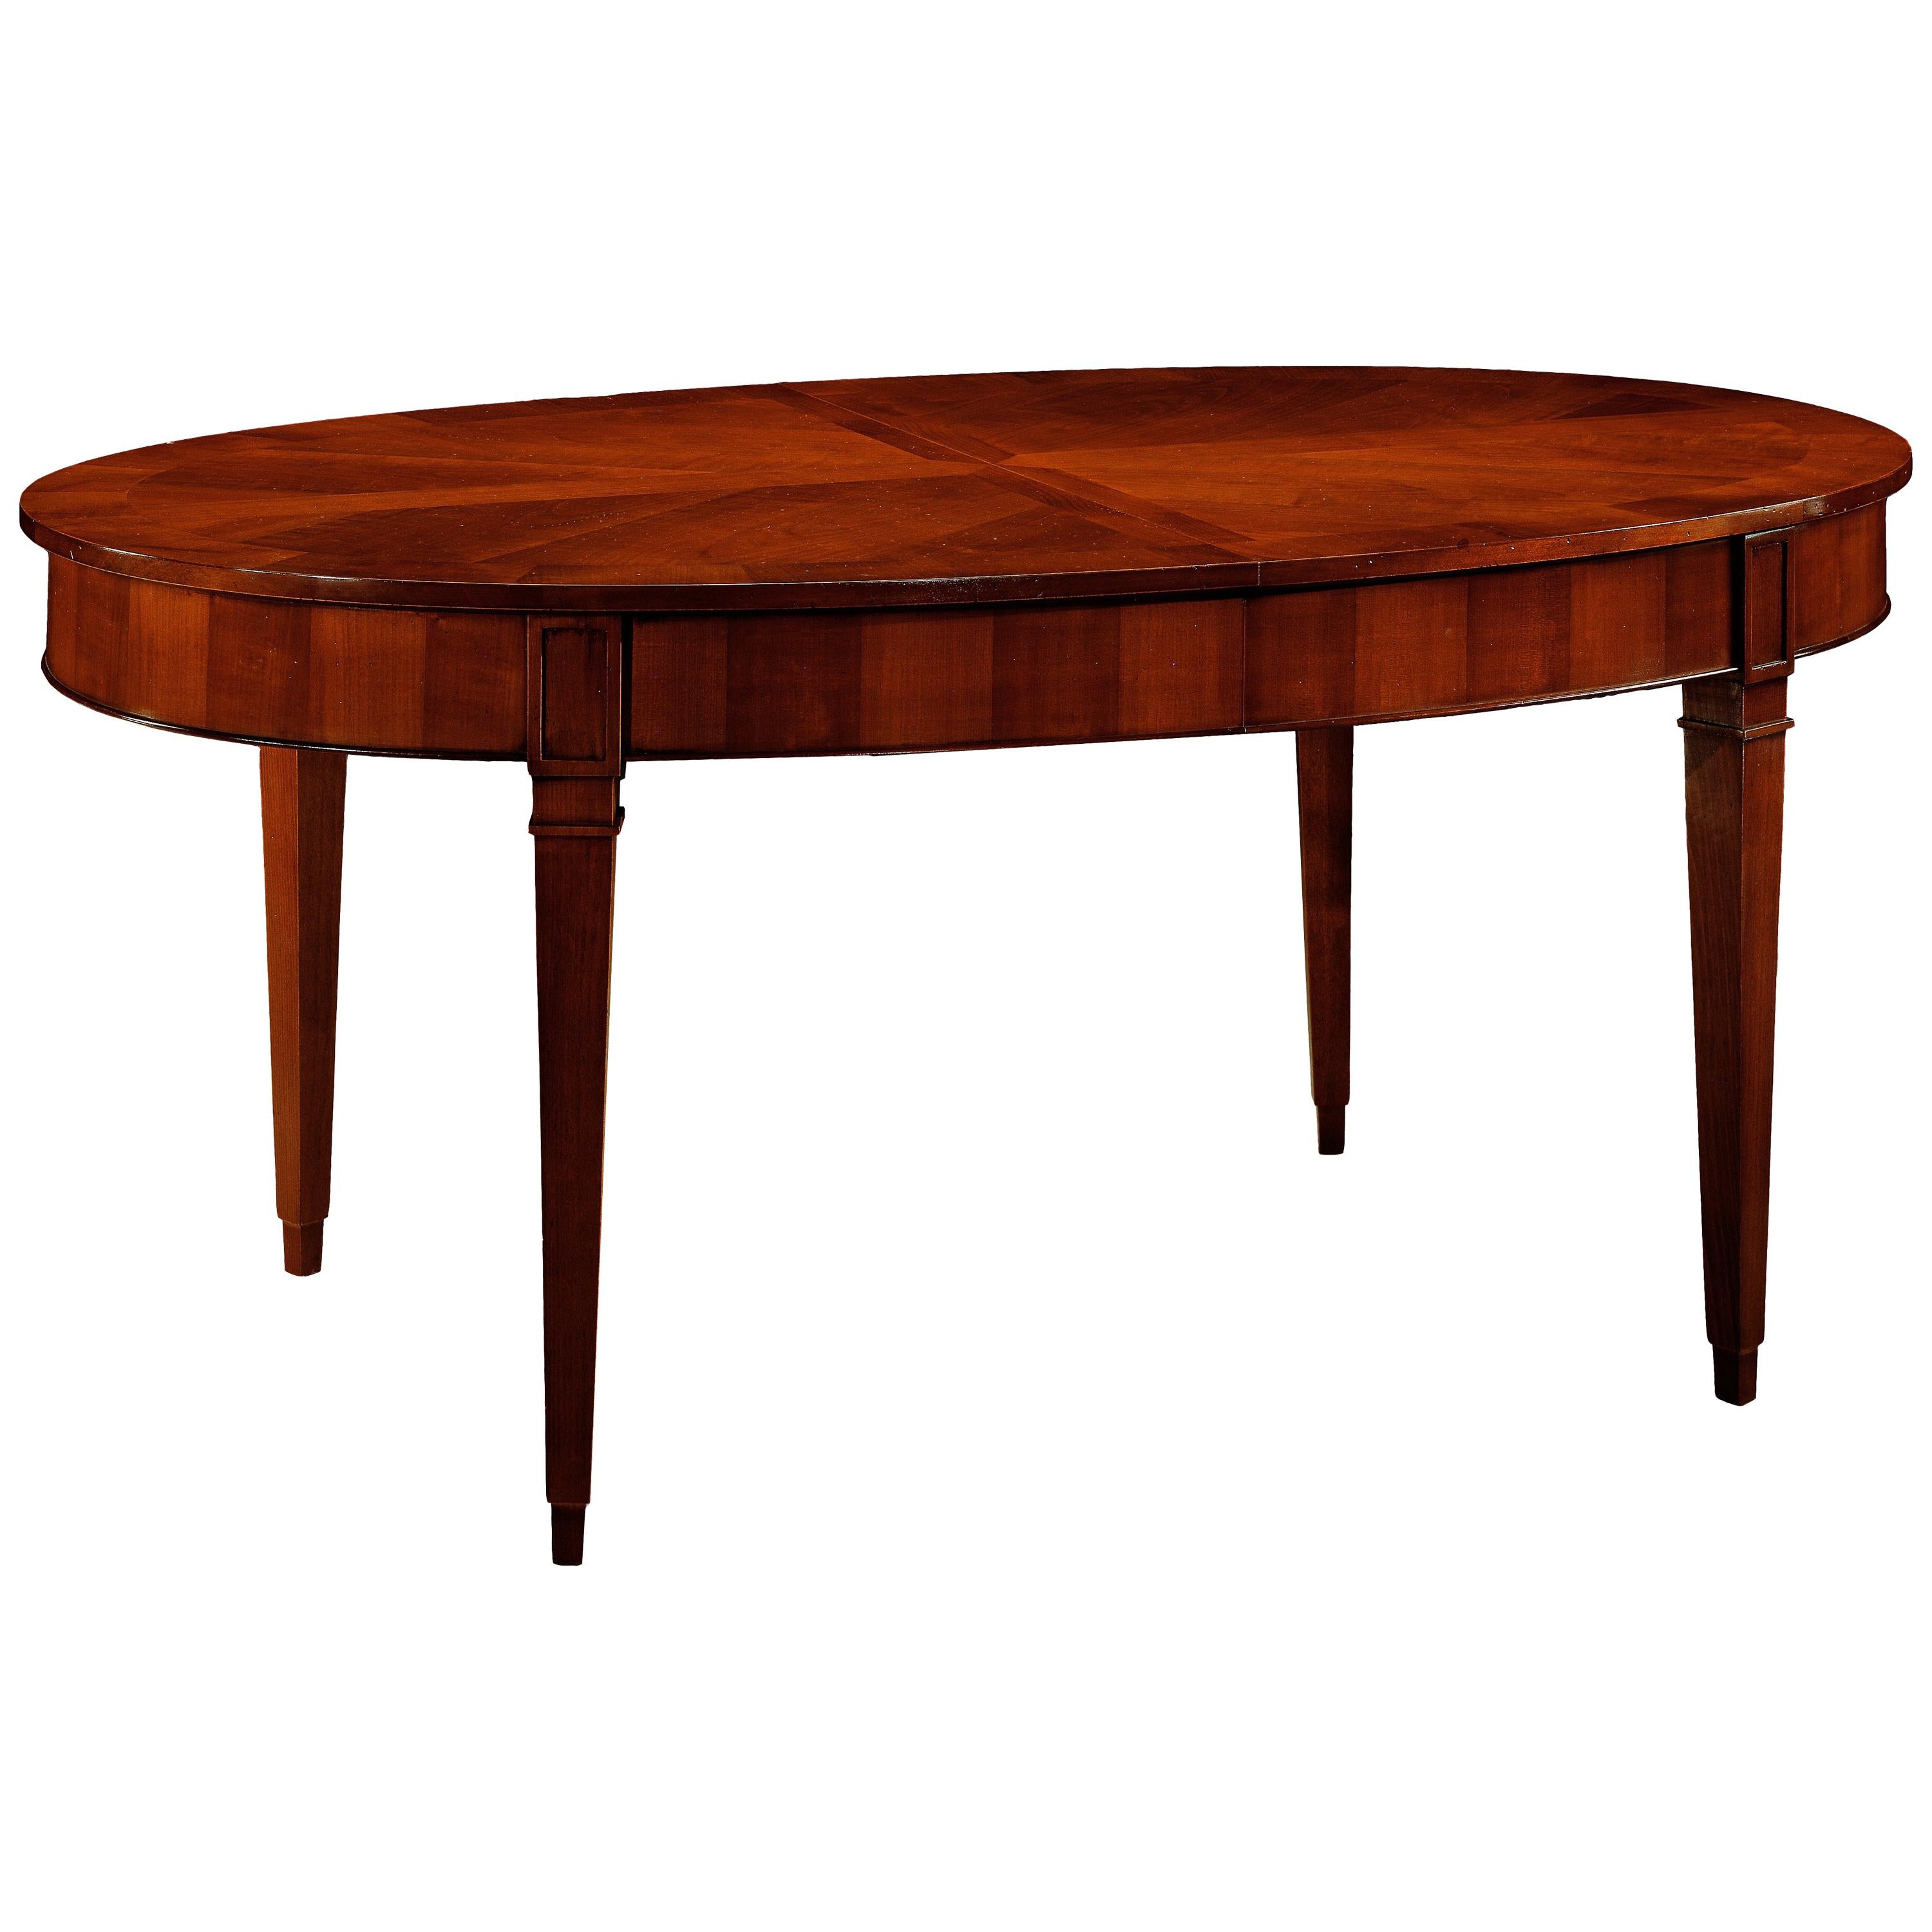 Contemporary Extendable Oval Table in Direttorio Style Made of Cherry Wood